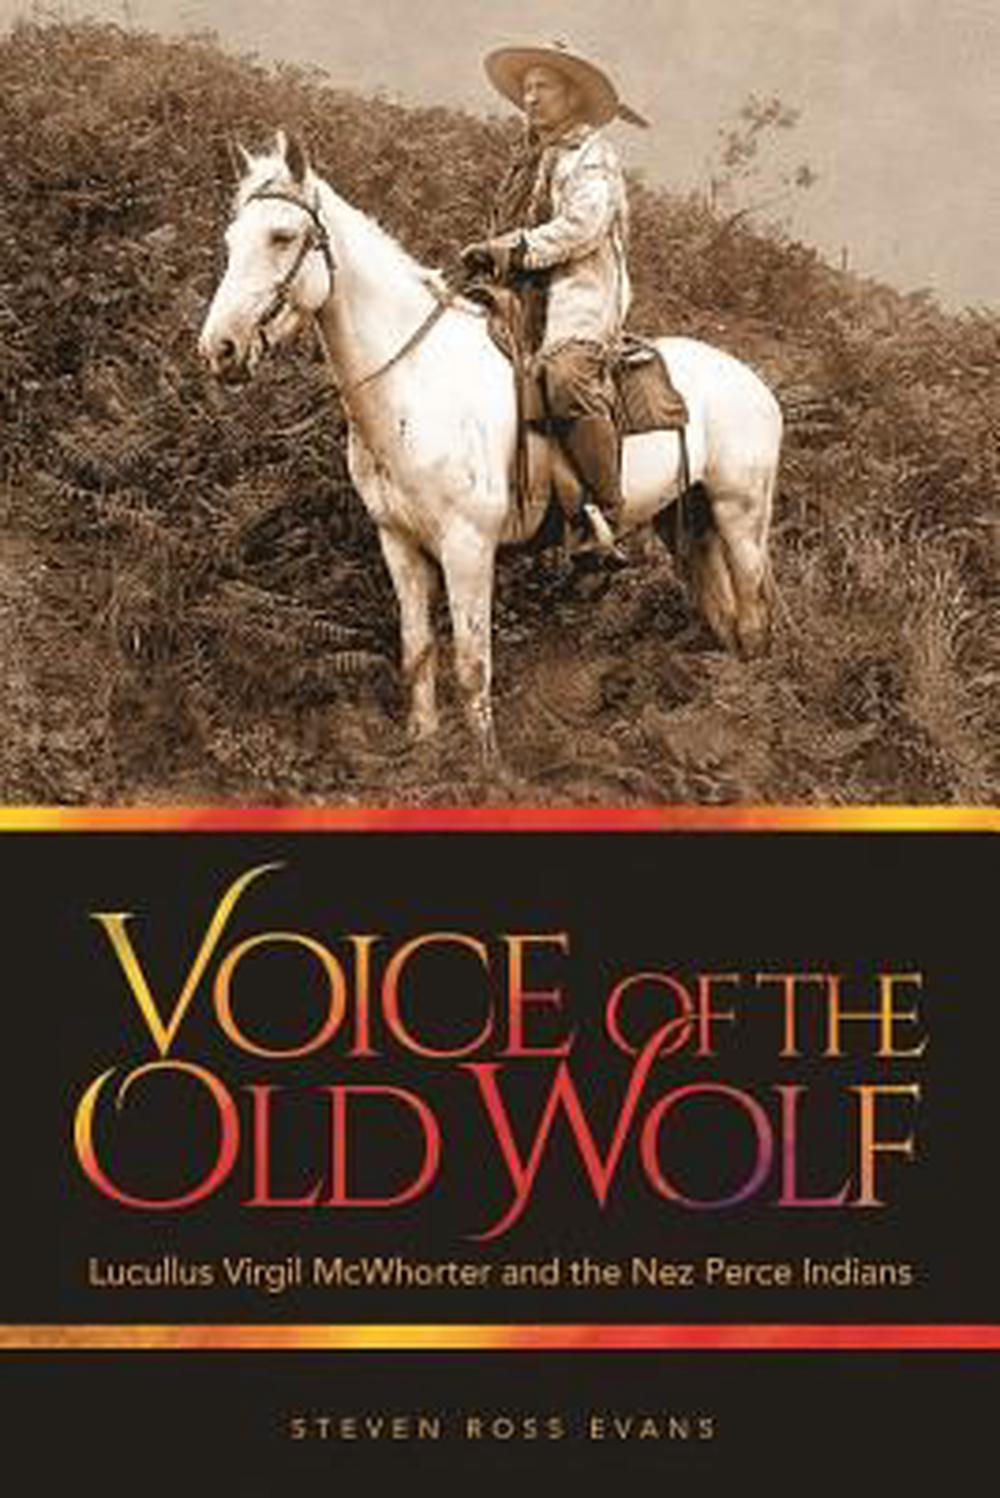 Voice of the Old Wolf: Lucullus Virgil McWhorter and the Nez Perce Indians (book cover)